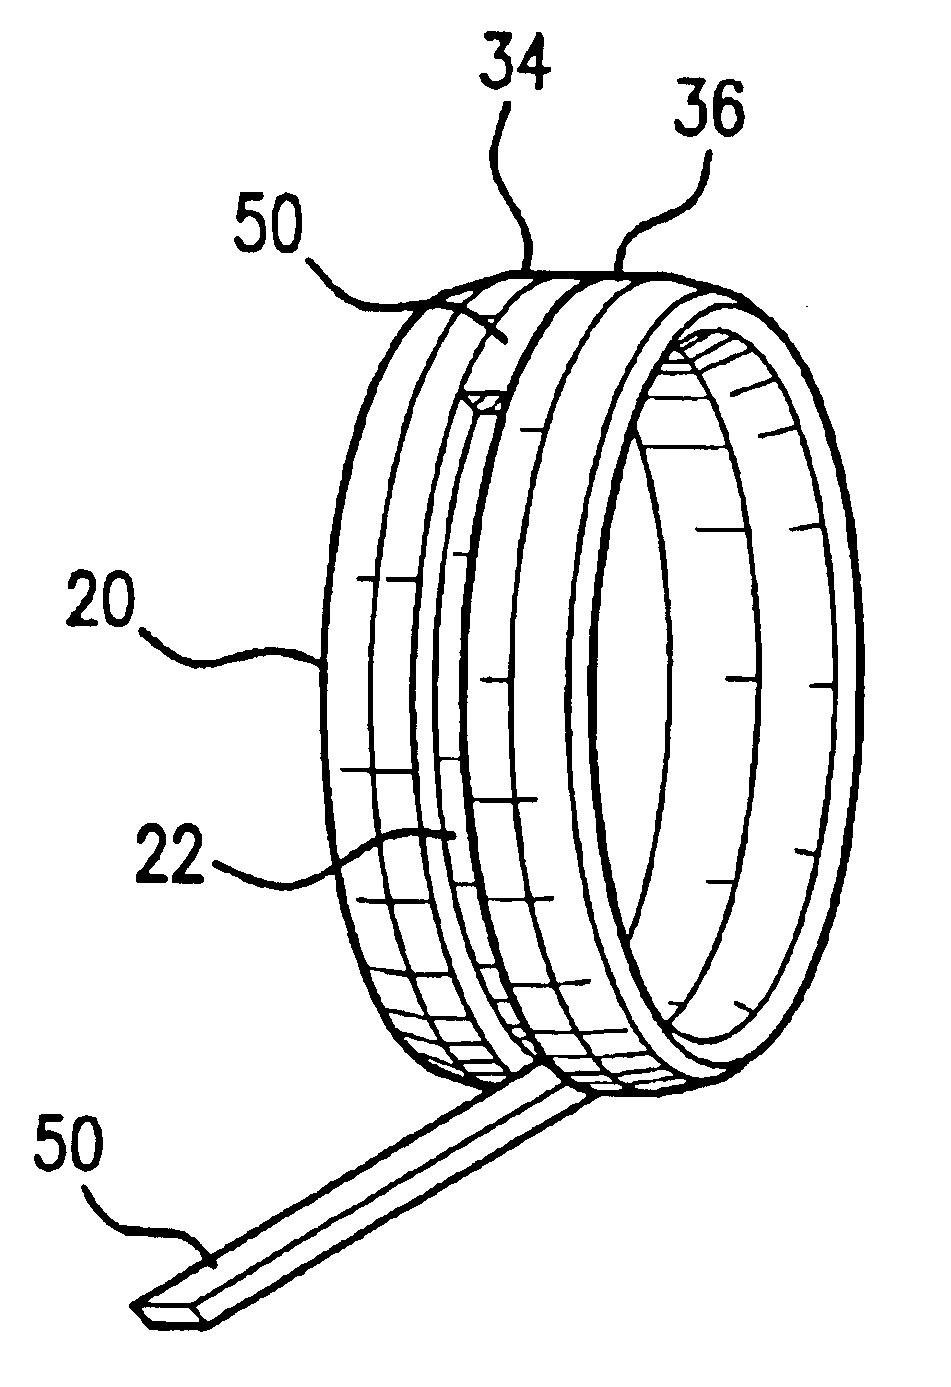 Jewelry ring and method of manufacturing same